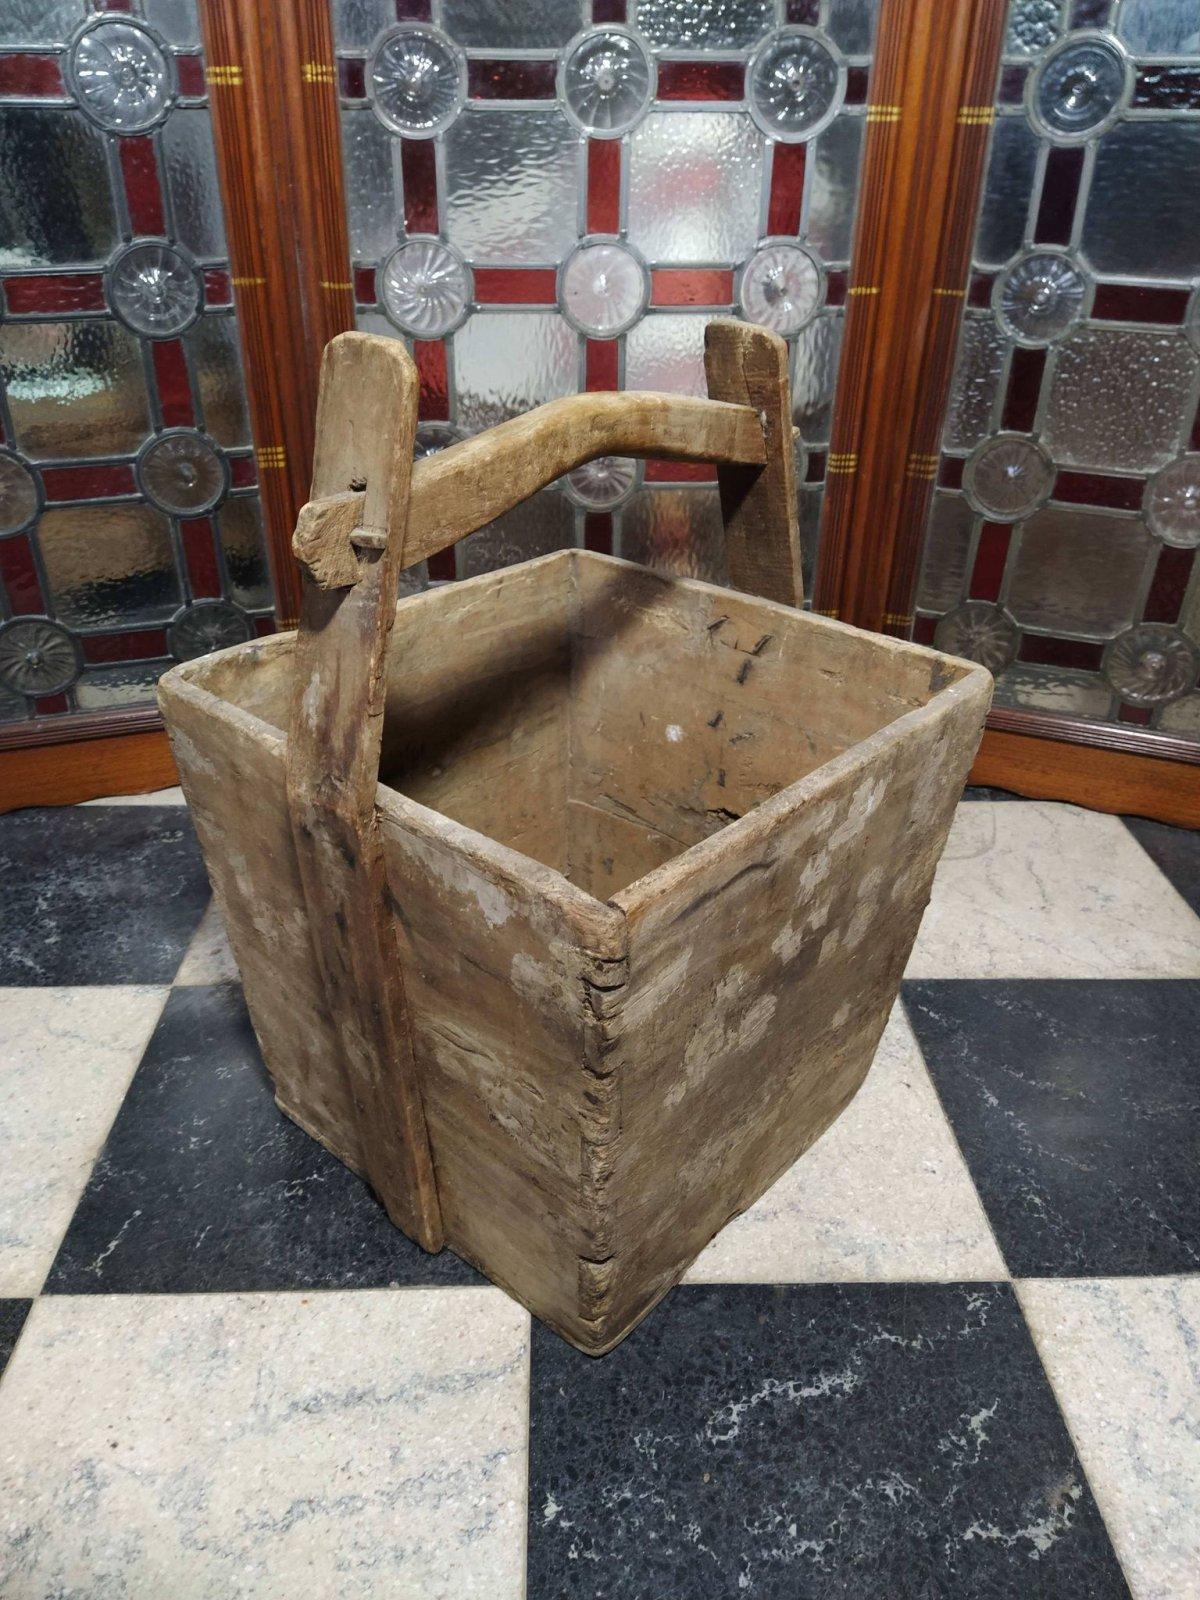 Chinese Antique wooden rice bucket with through pegged joints to the handle uniting the carrying straps which were bent into place when the wood was green when inserting the shaped handle and peg joints.